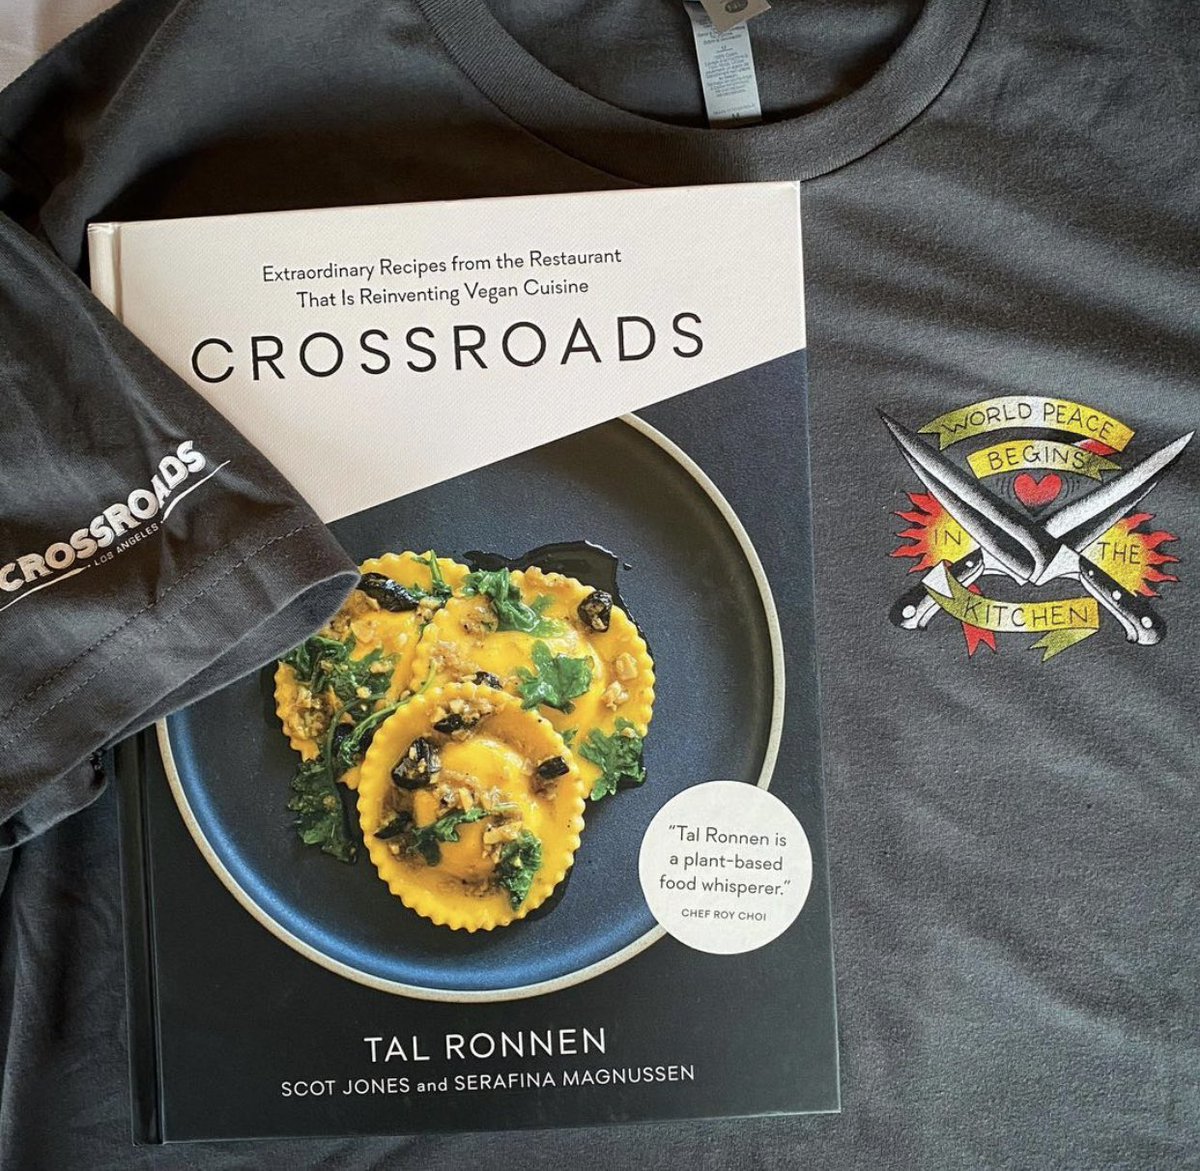 New charcoal gray Crossroads T-shirts (World peace begins in the kitchen) bundled with our cookbook now available for the holidays. Call the front desk at (323) 782-9245 to order yours for just $40 (includes book and shirt) #supportsmallbusiness #saveourrestaurants